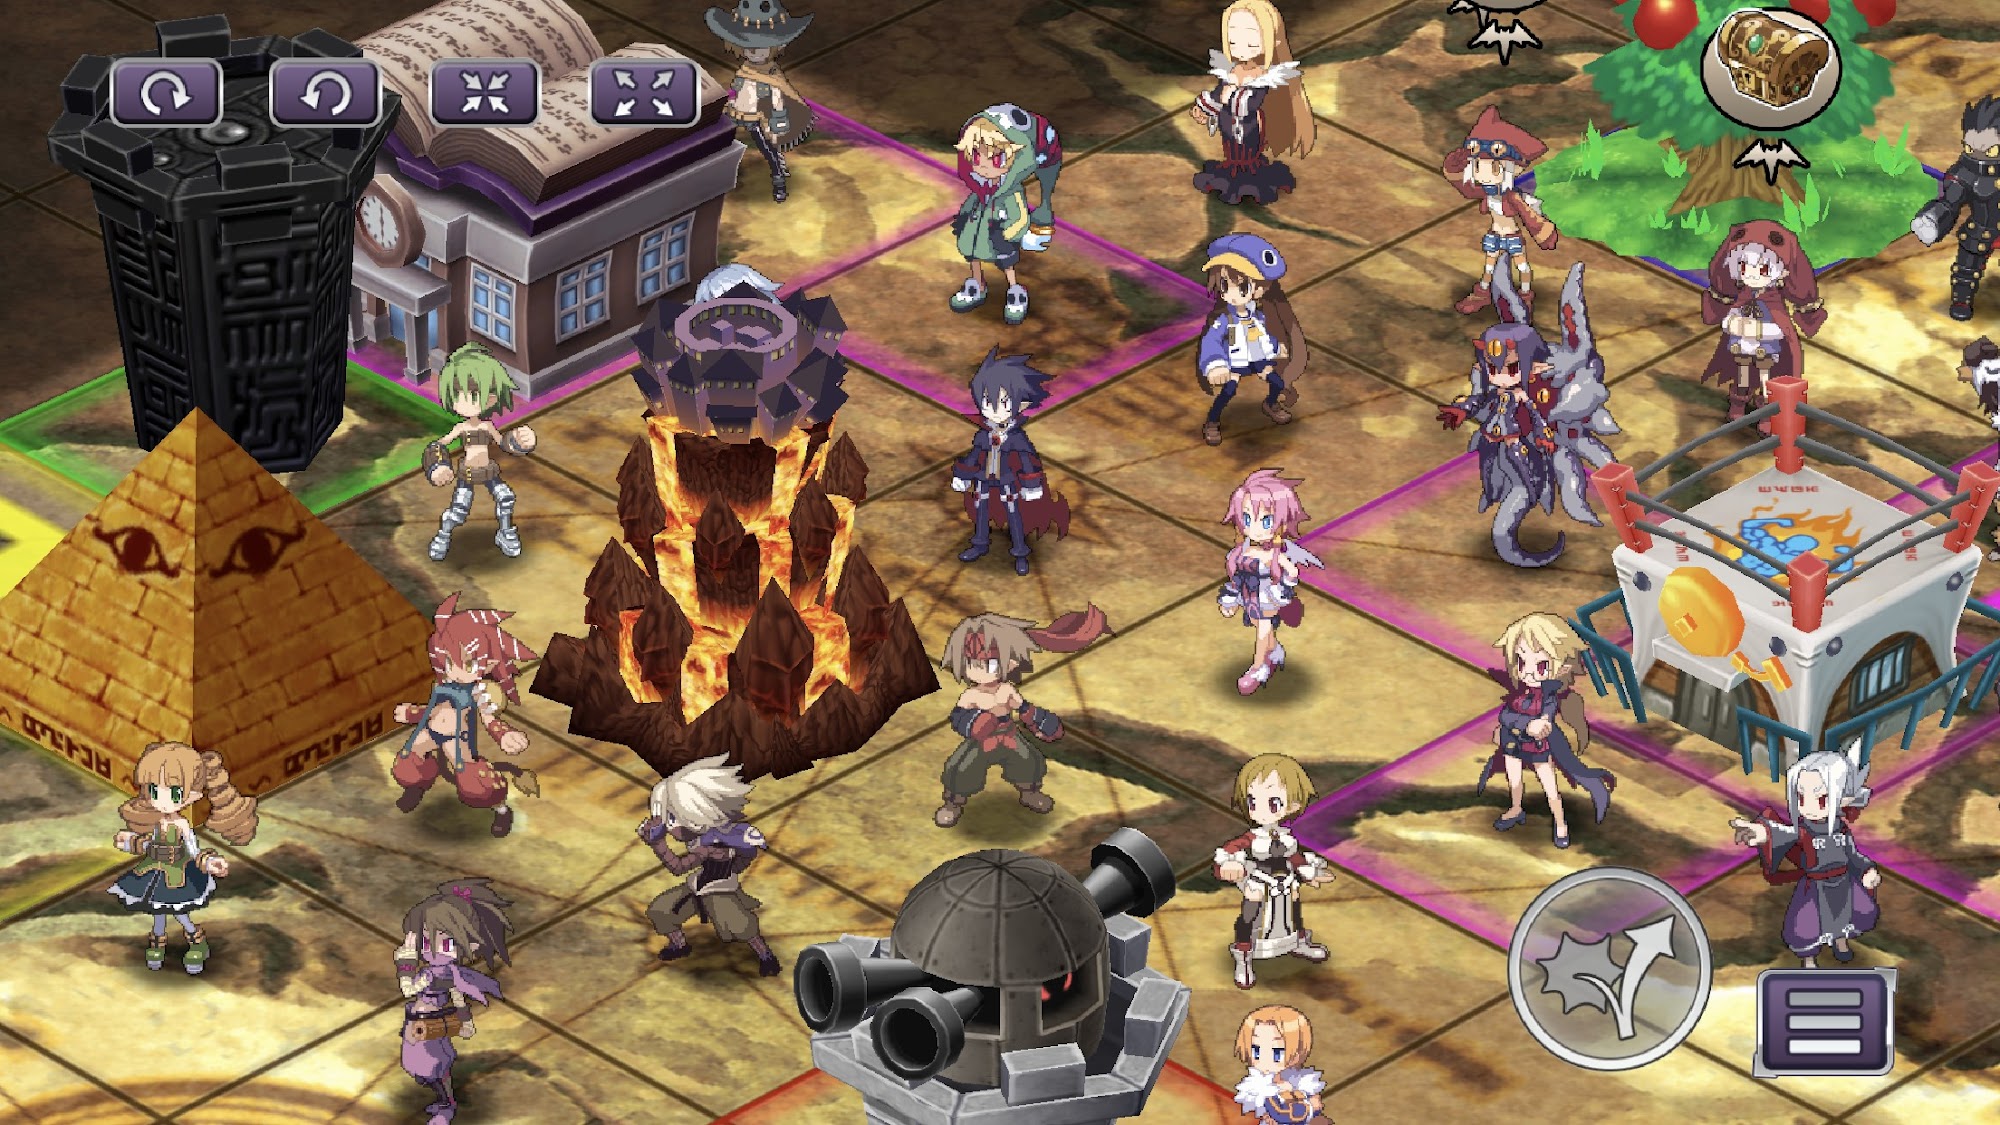 Disgaea 4: A Promise Revisited - Android game screenshots.